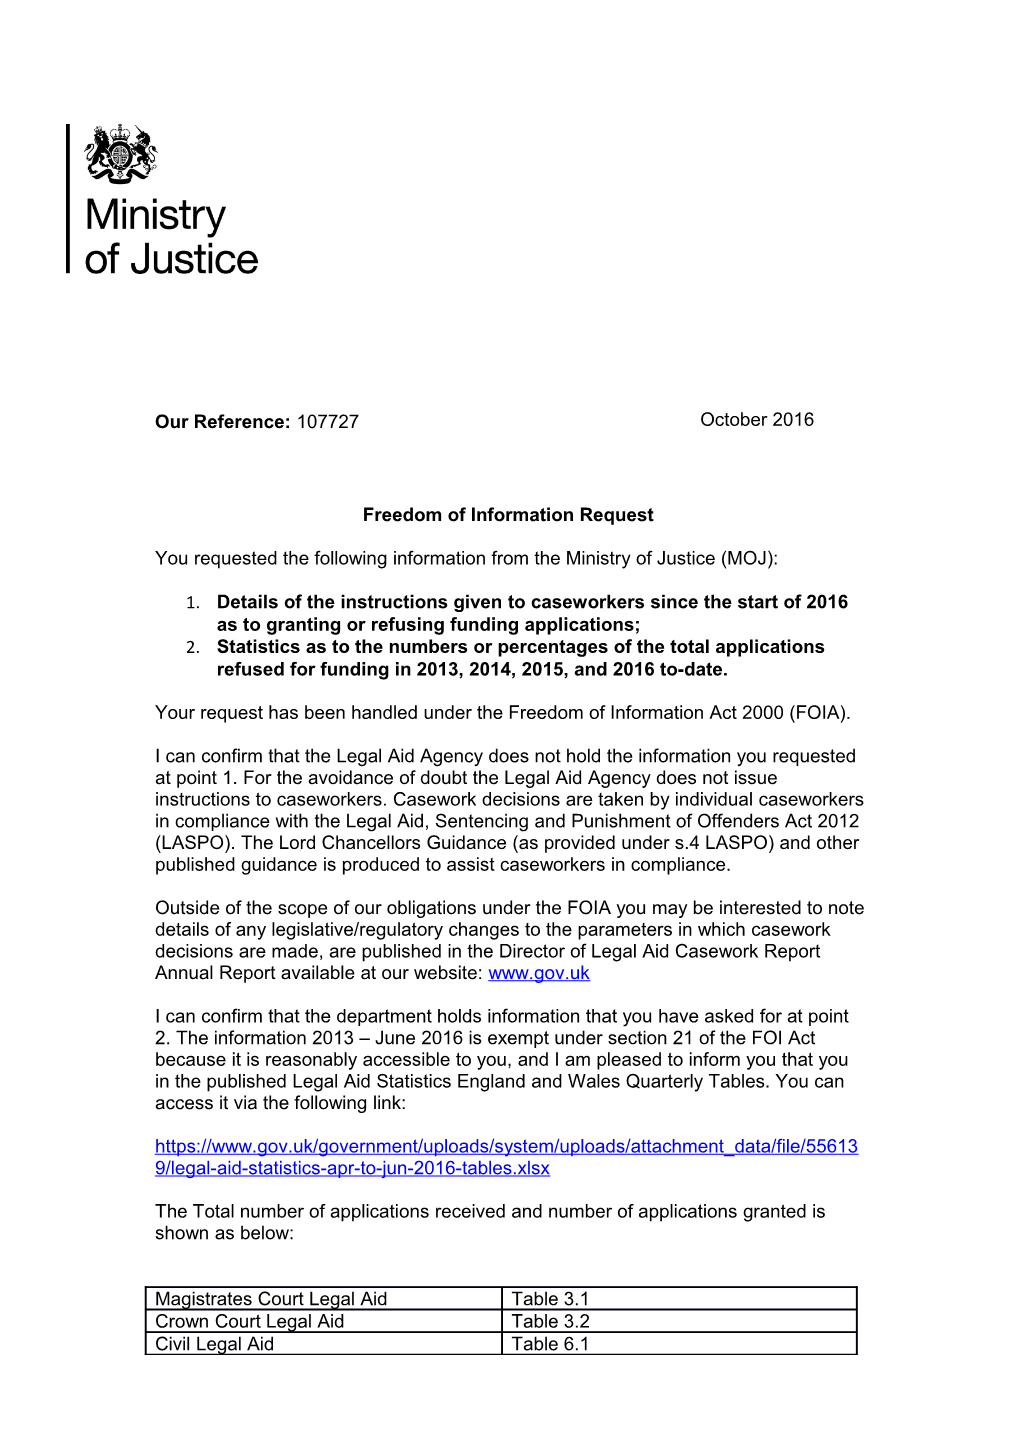 Legal Aid Applications Received and Granted